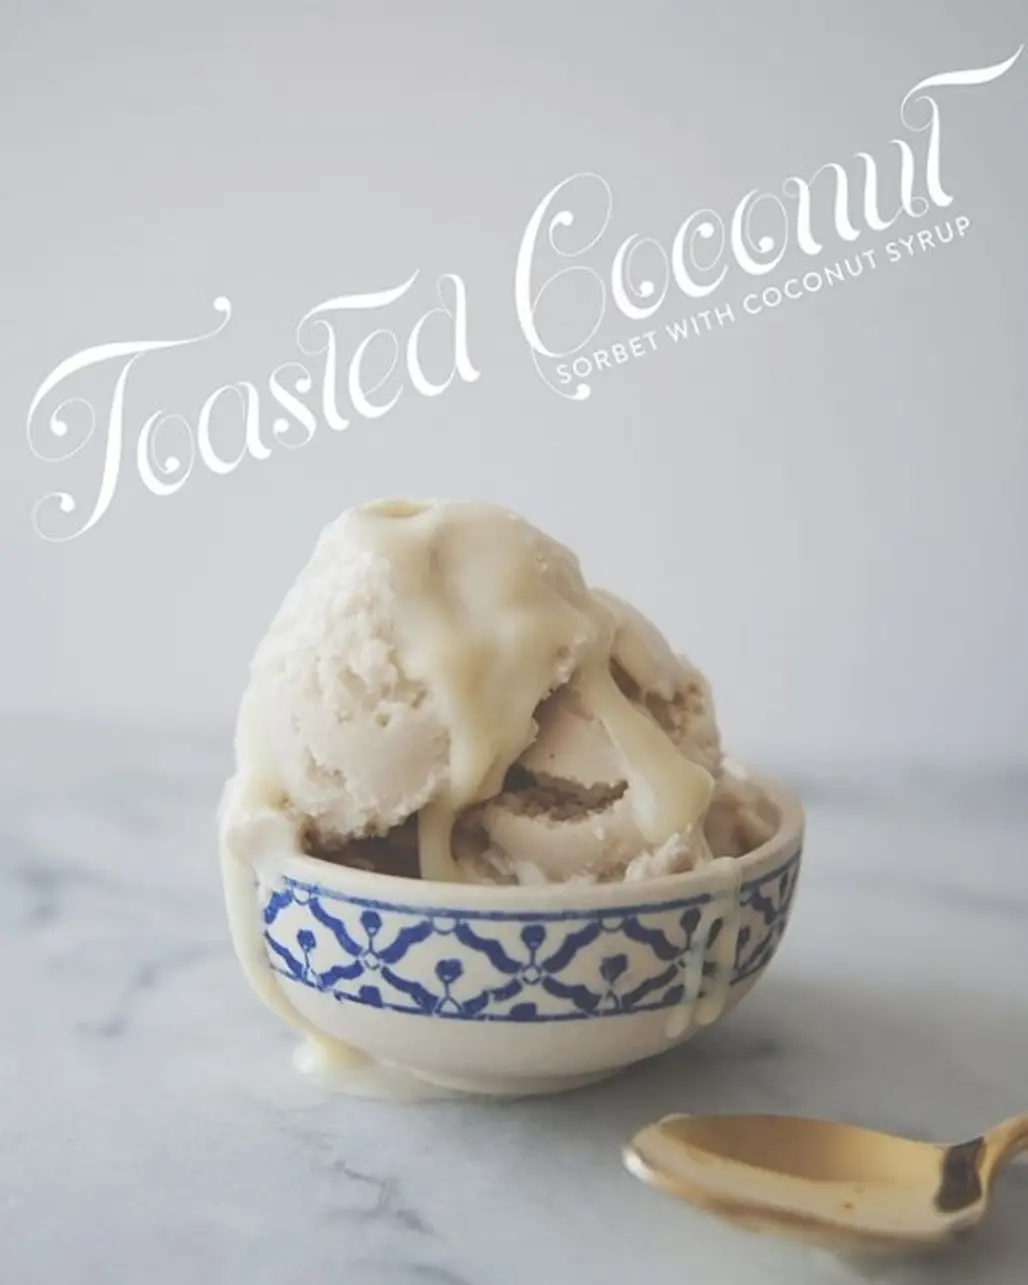 TOASTED COCONUT SORBET